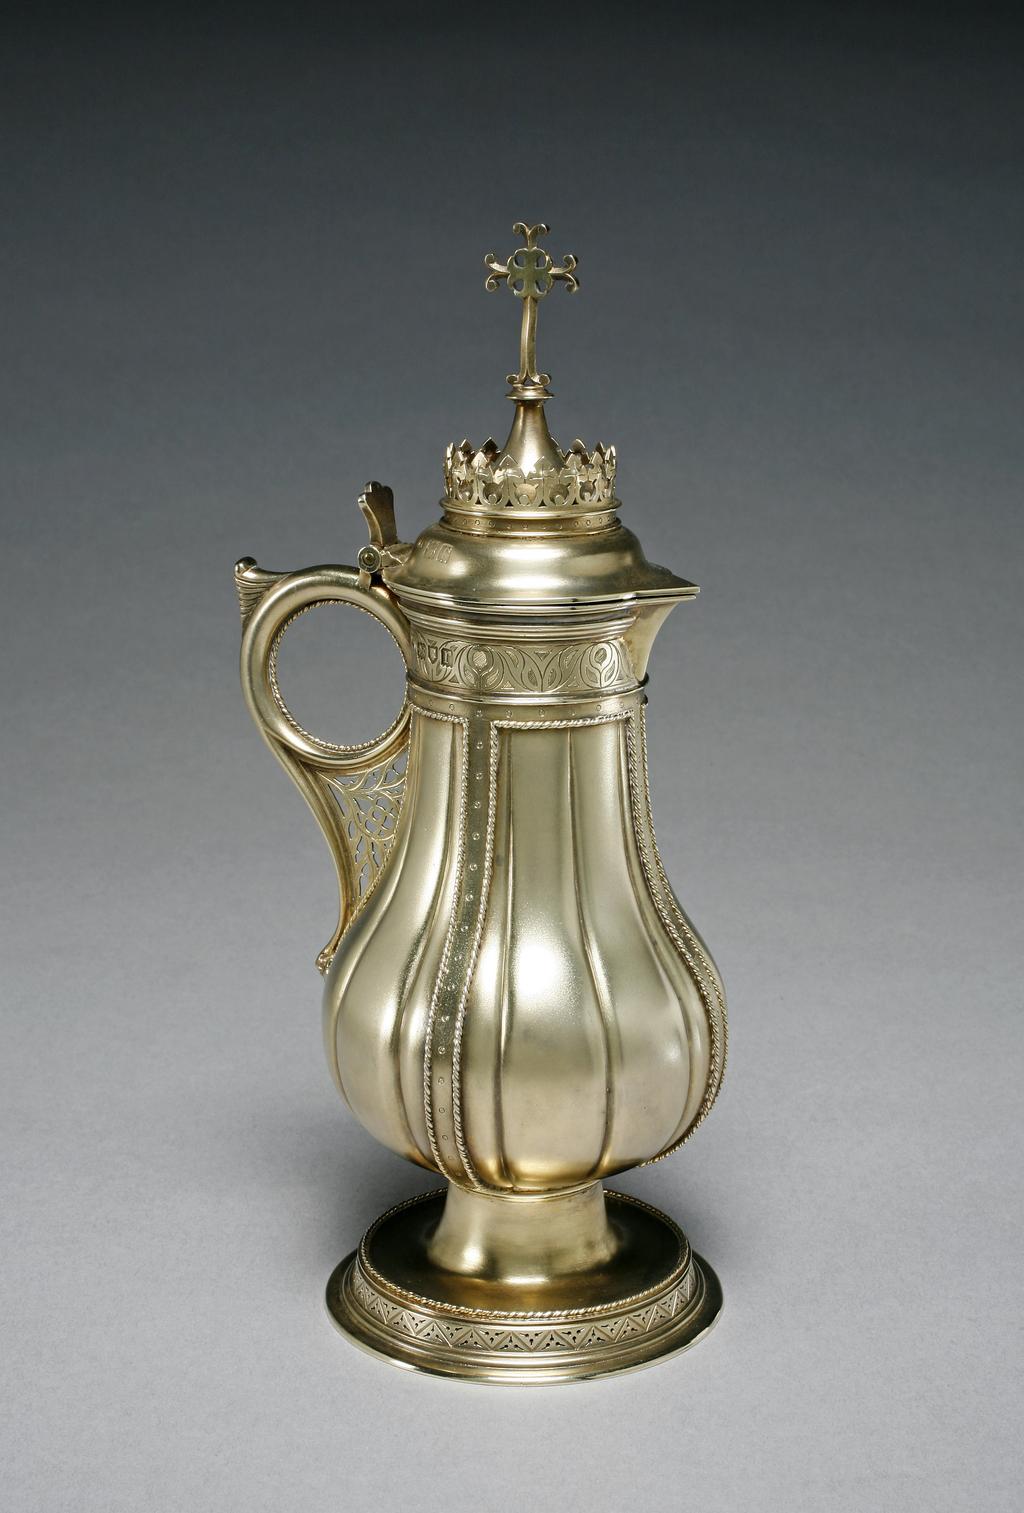 An image of Church Plate. Cruet. Keith & Co, London. The cruet has a baluster body and sparrow's beak spout, and stands on a stepped circular spreading foot. A border at the top of the body is engraved with a Gothic pattern of leaves, beneath which the body is fluted and devided into four panels by applied straps decorated with punched circles and a rope edge. The foot stands on a pierced gallery beneath an applied rope border. The slightly domed hinged cover is surmounted by a cross rising from a ring of trefoils. The handle is formed from a rope edged circle within a scroll, the area between being filled with a pierced grill of Gothic design. On the base is an inscription: To the Honour of God / and in memory of / Reginald Charles Coleridge / this Flagon was presented to / Hartford Parish Church / by his friends / many of whom were his comrades / in the Church Lad's Brigade / and the Boy Scouts / he went to his rest on the / 15 April 1912 / his body went down into the deep / with the wreck of the S.S. Titanic / and now sleeps in the hope / until the Sea shall / give up Her dead. Silver-gilt and matted, 1907-1908. Gothic Revival. On loan from Hartford Parish Church Council.